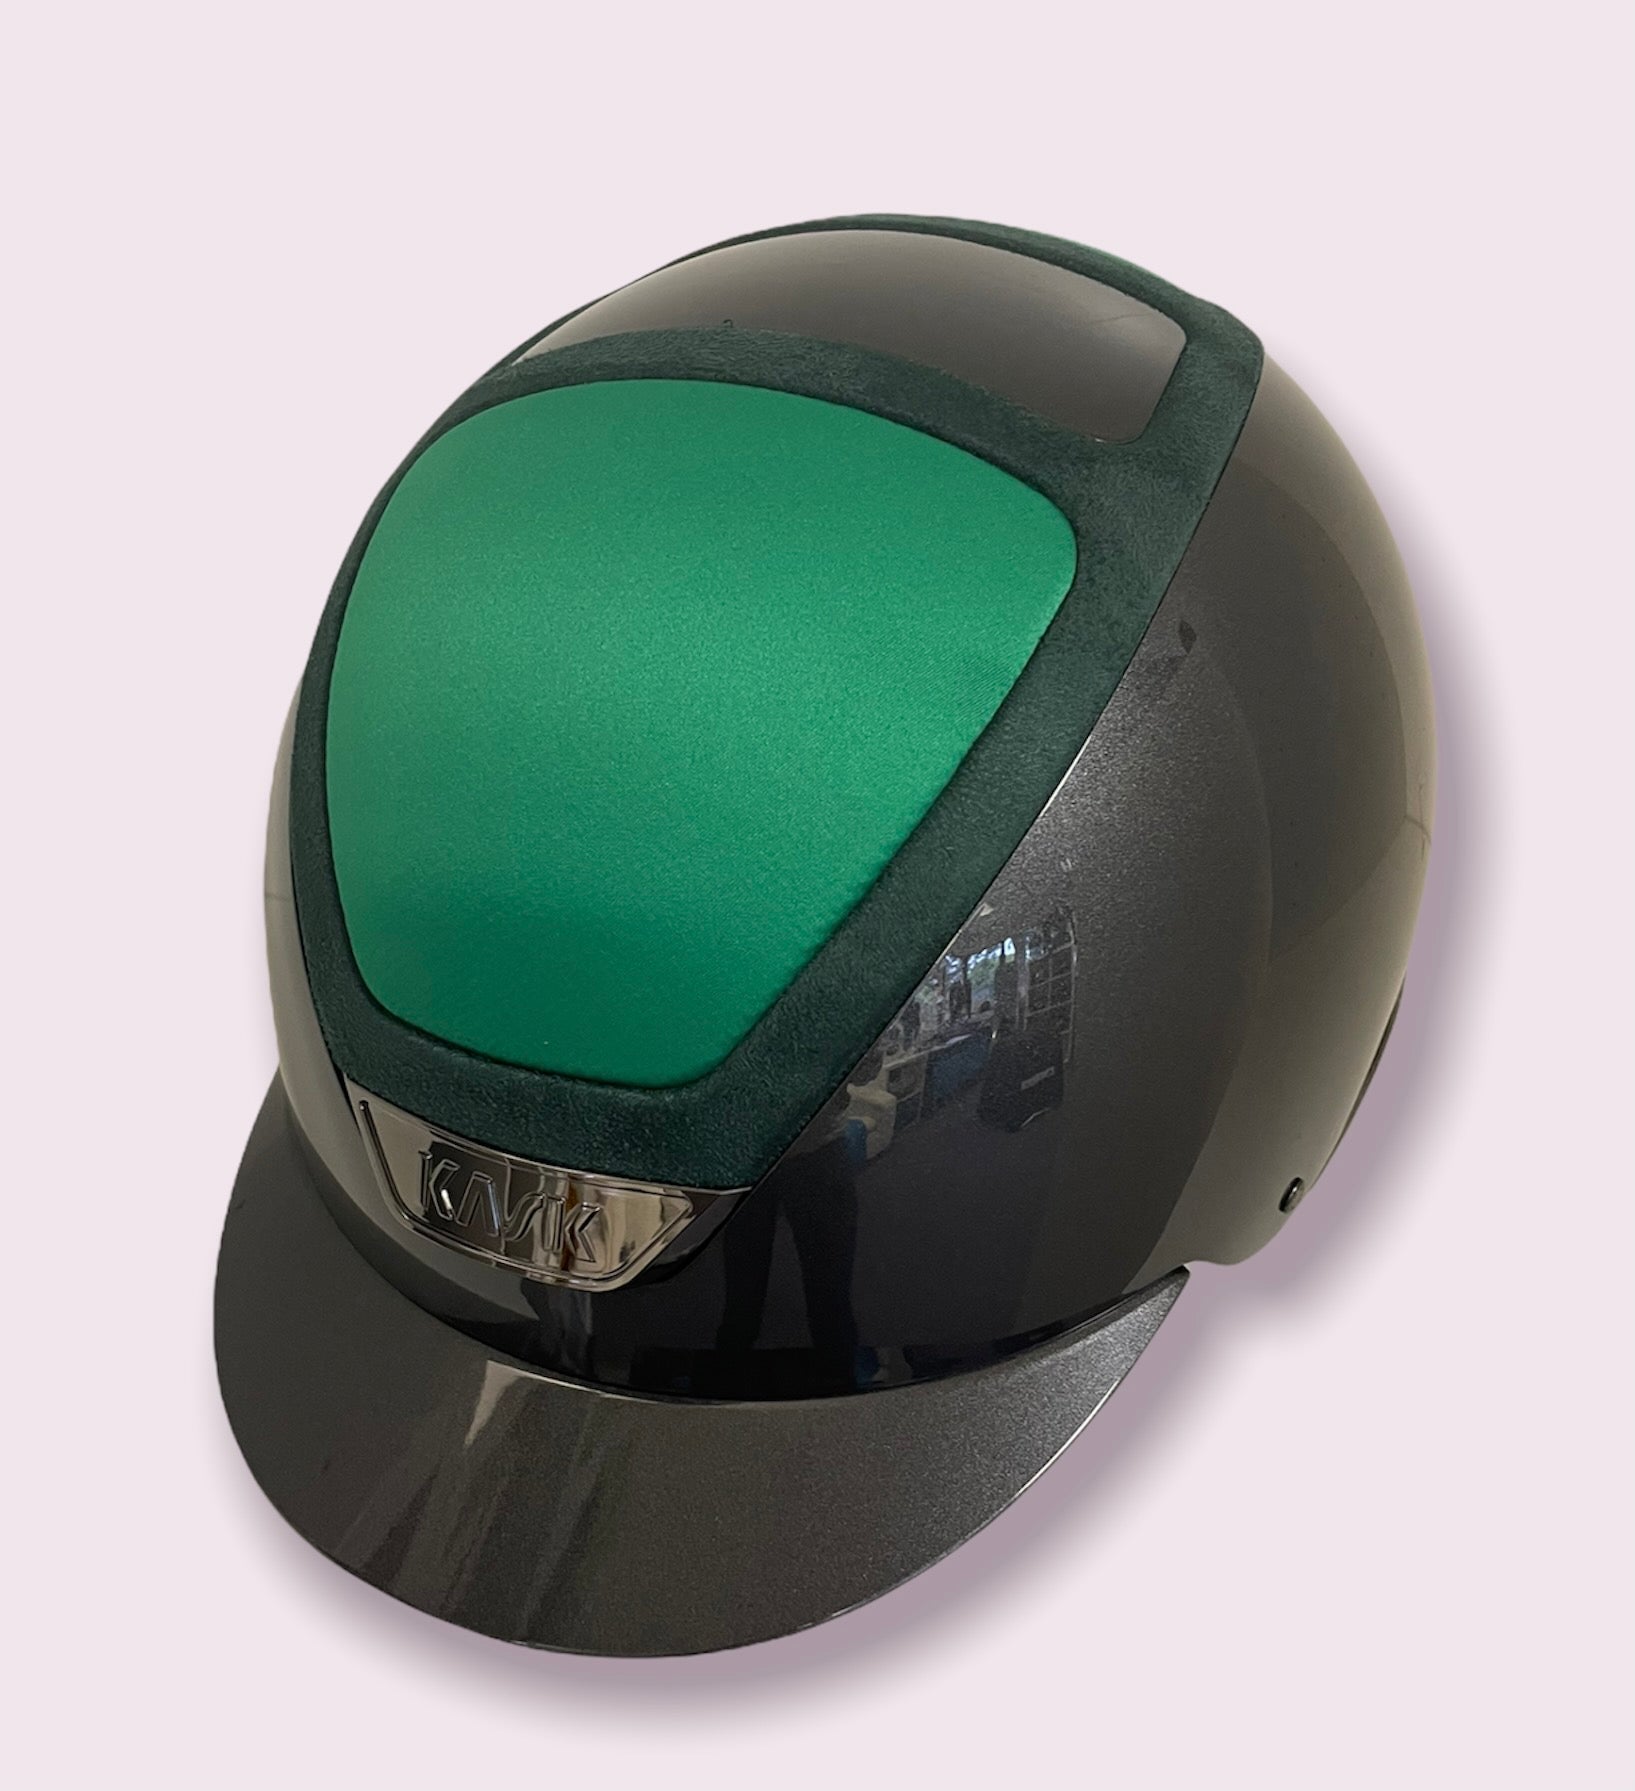 Kask Helmet, Grey Shine with Emerald Green Aerator and Forrest Green Frame